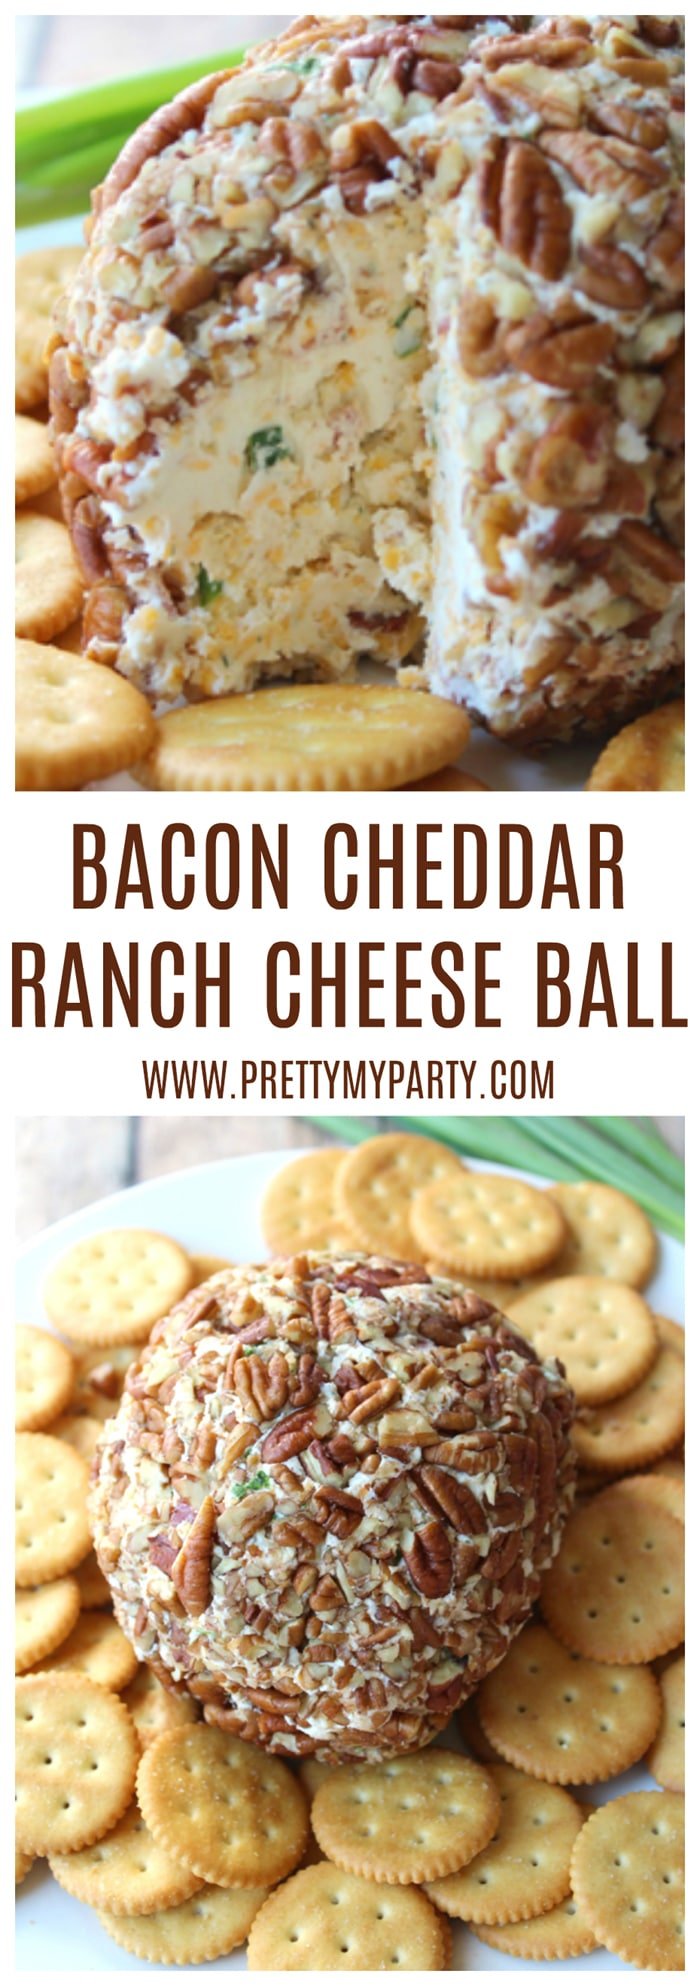 Bacon Cheddar Ranch Cheese Ball Recipe on Pretty My Party